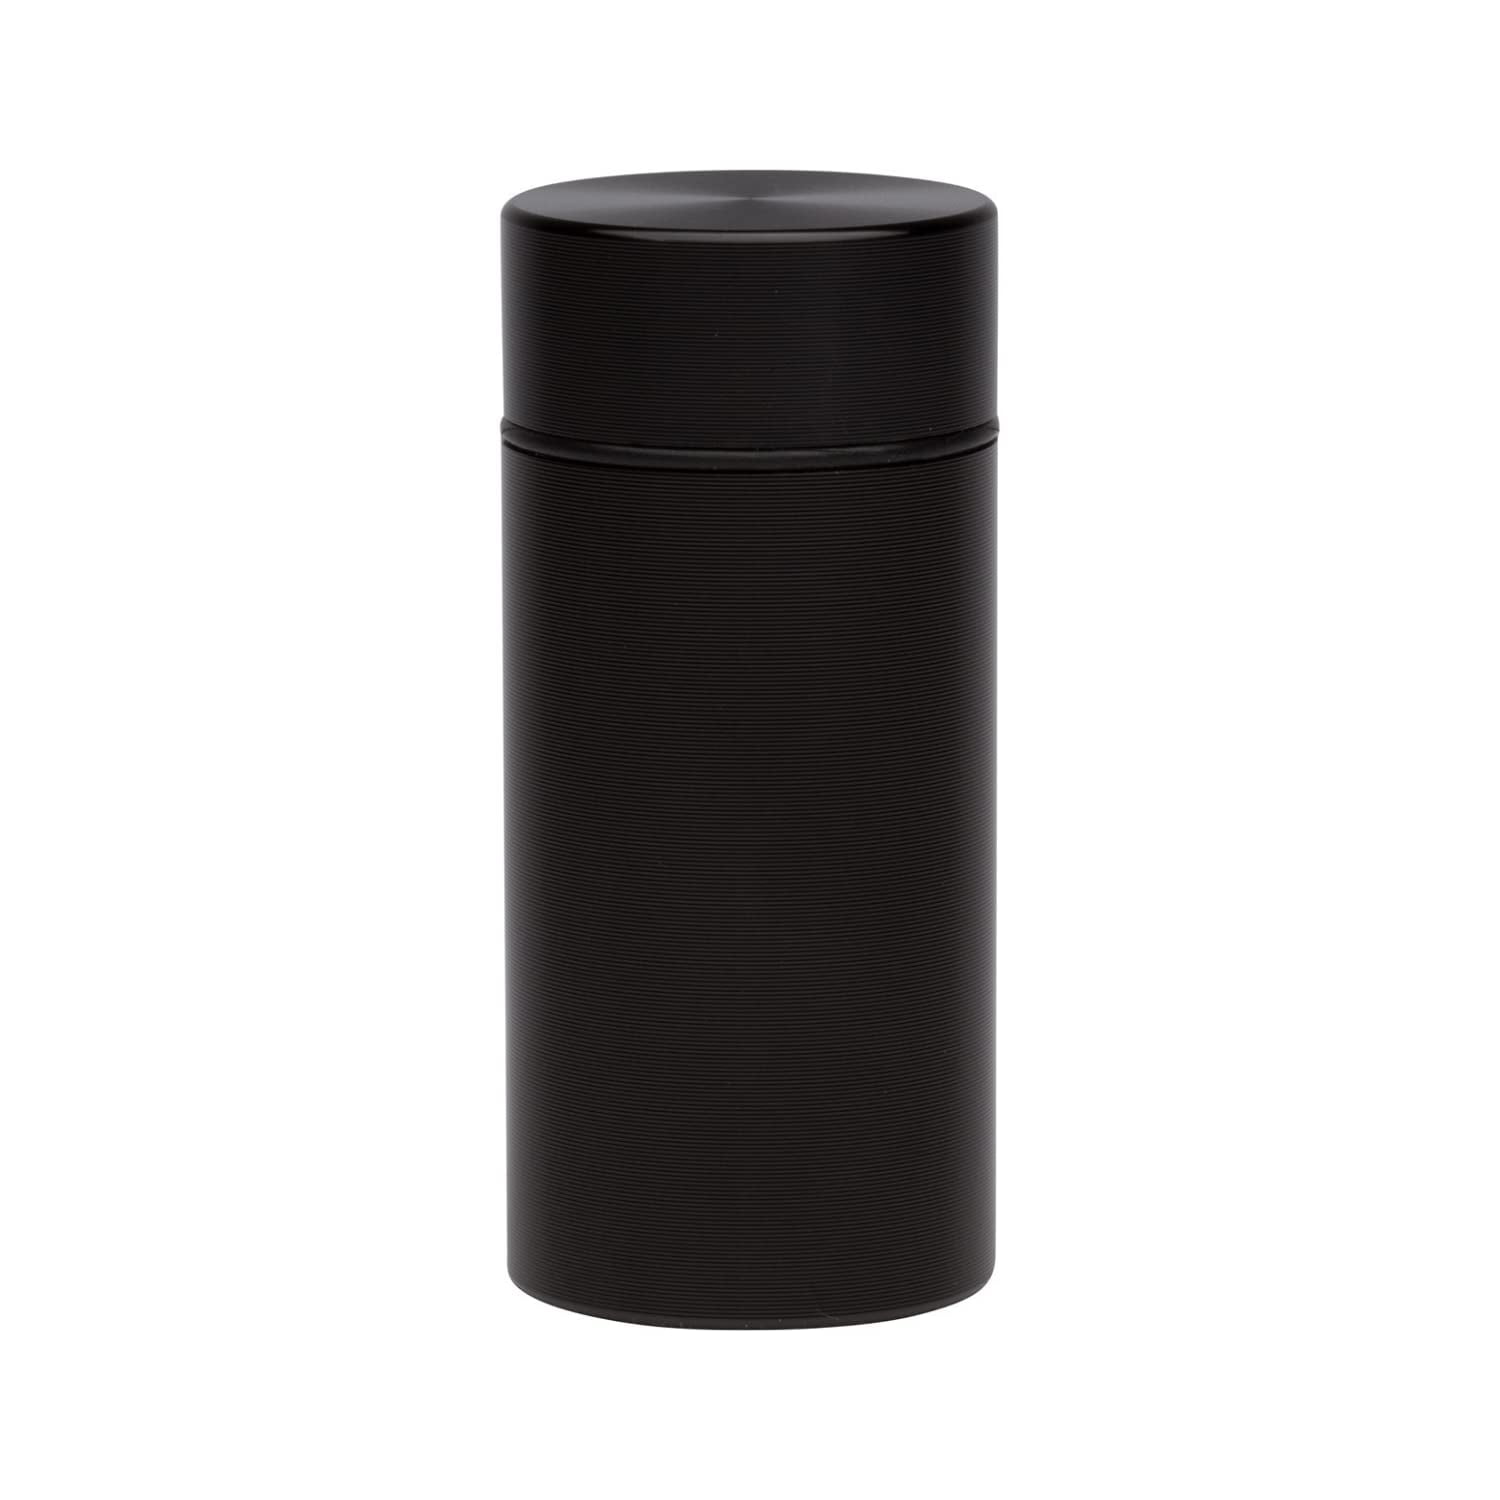 Smell Proof Storage Stash Jar Container Accessory Vacuum AirTight Portable BLACK 